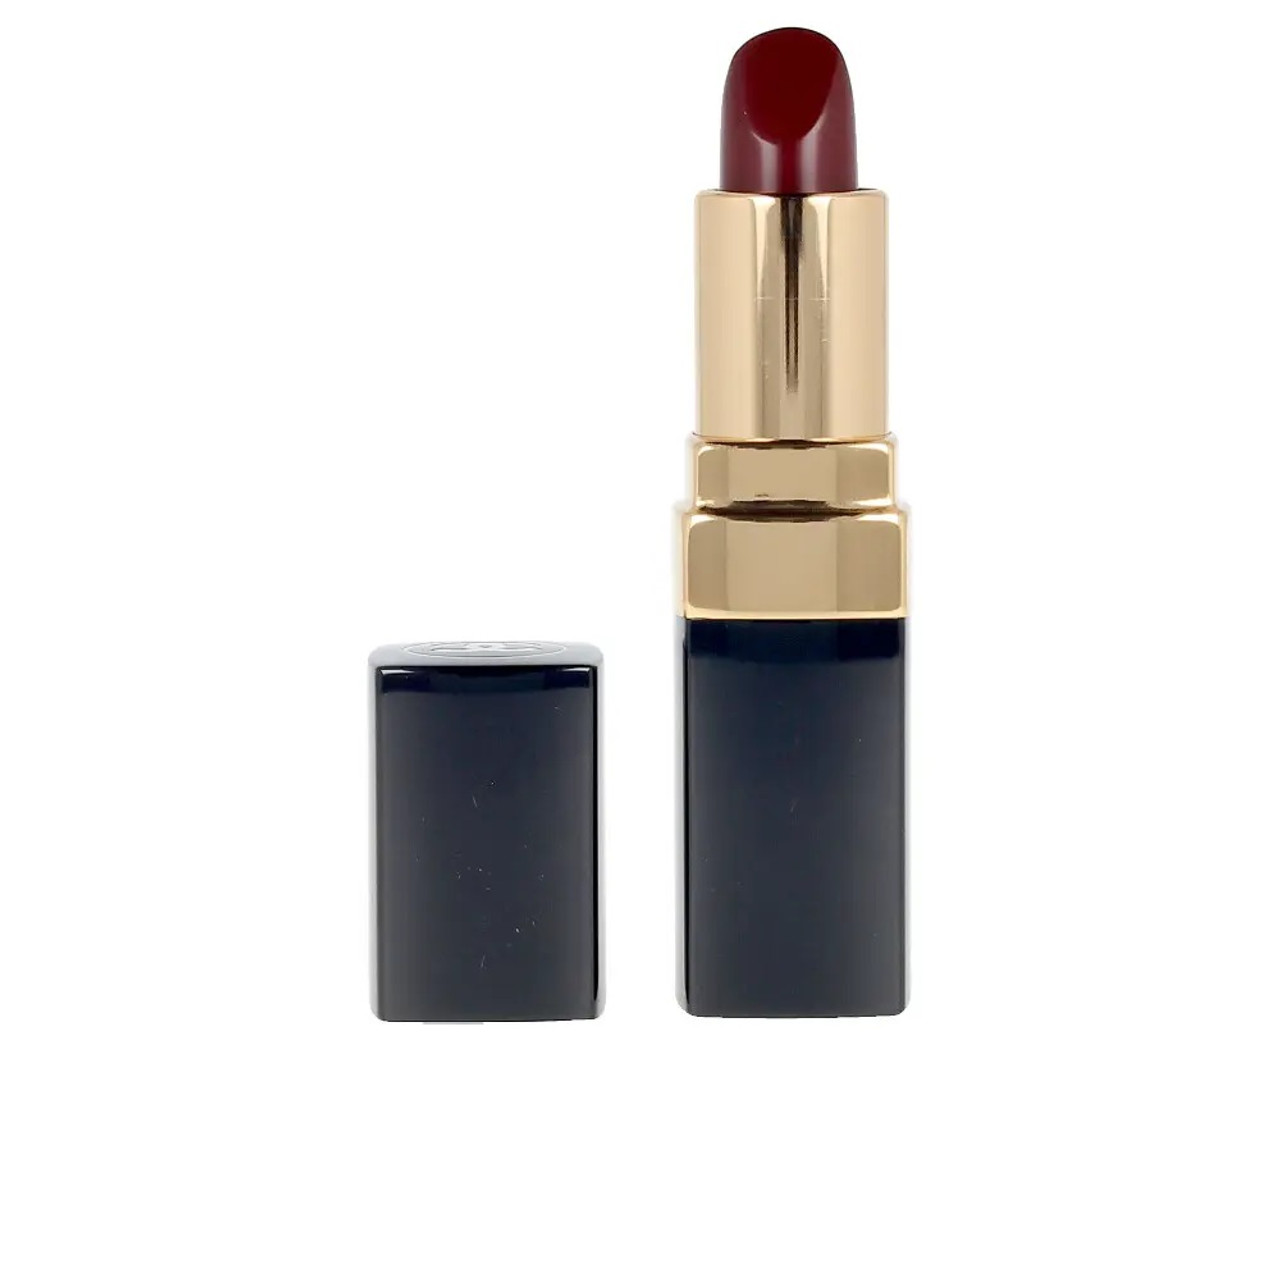 CHANEL ROUGE COCO 0.12 ULTRA HYDRATING LIP COLOUR #494 ATTRACTION -  Nandansons International Inc.